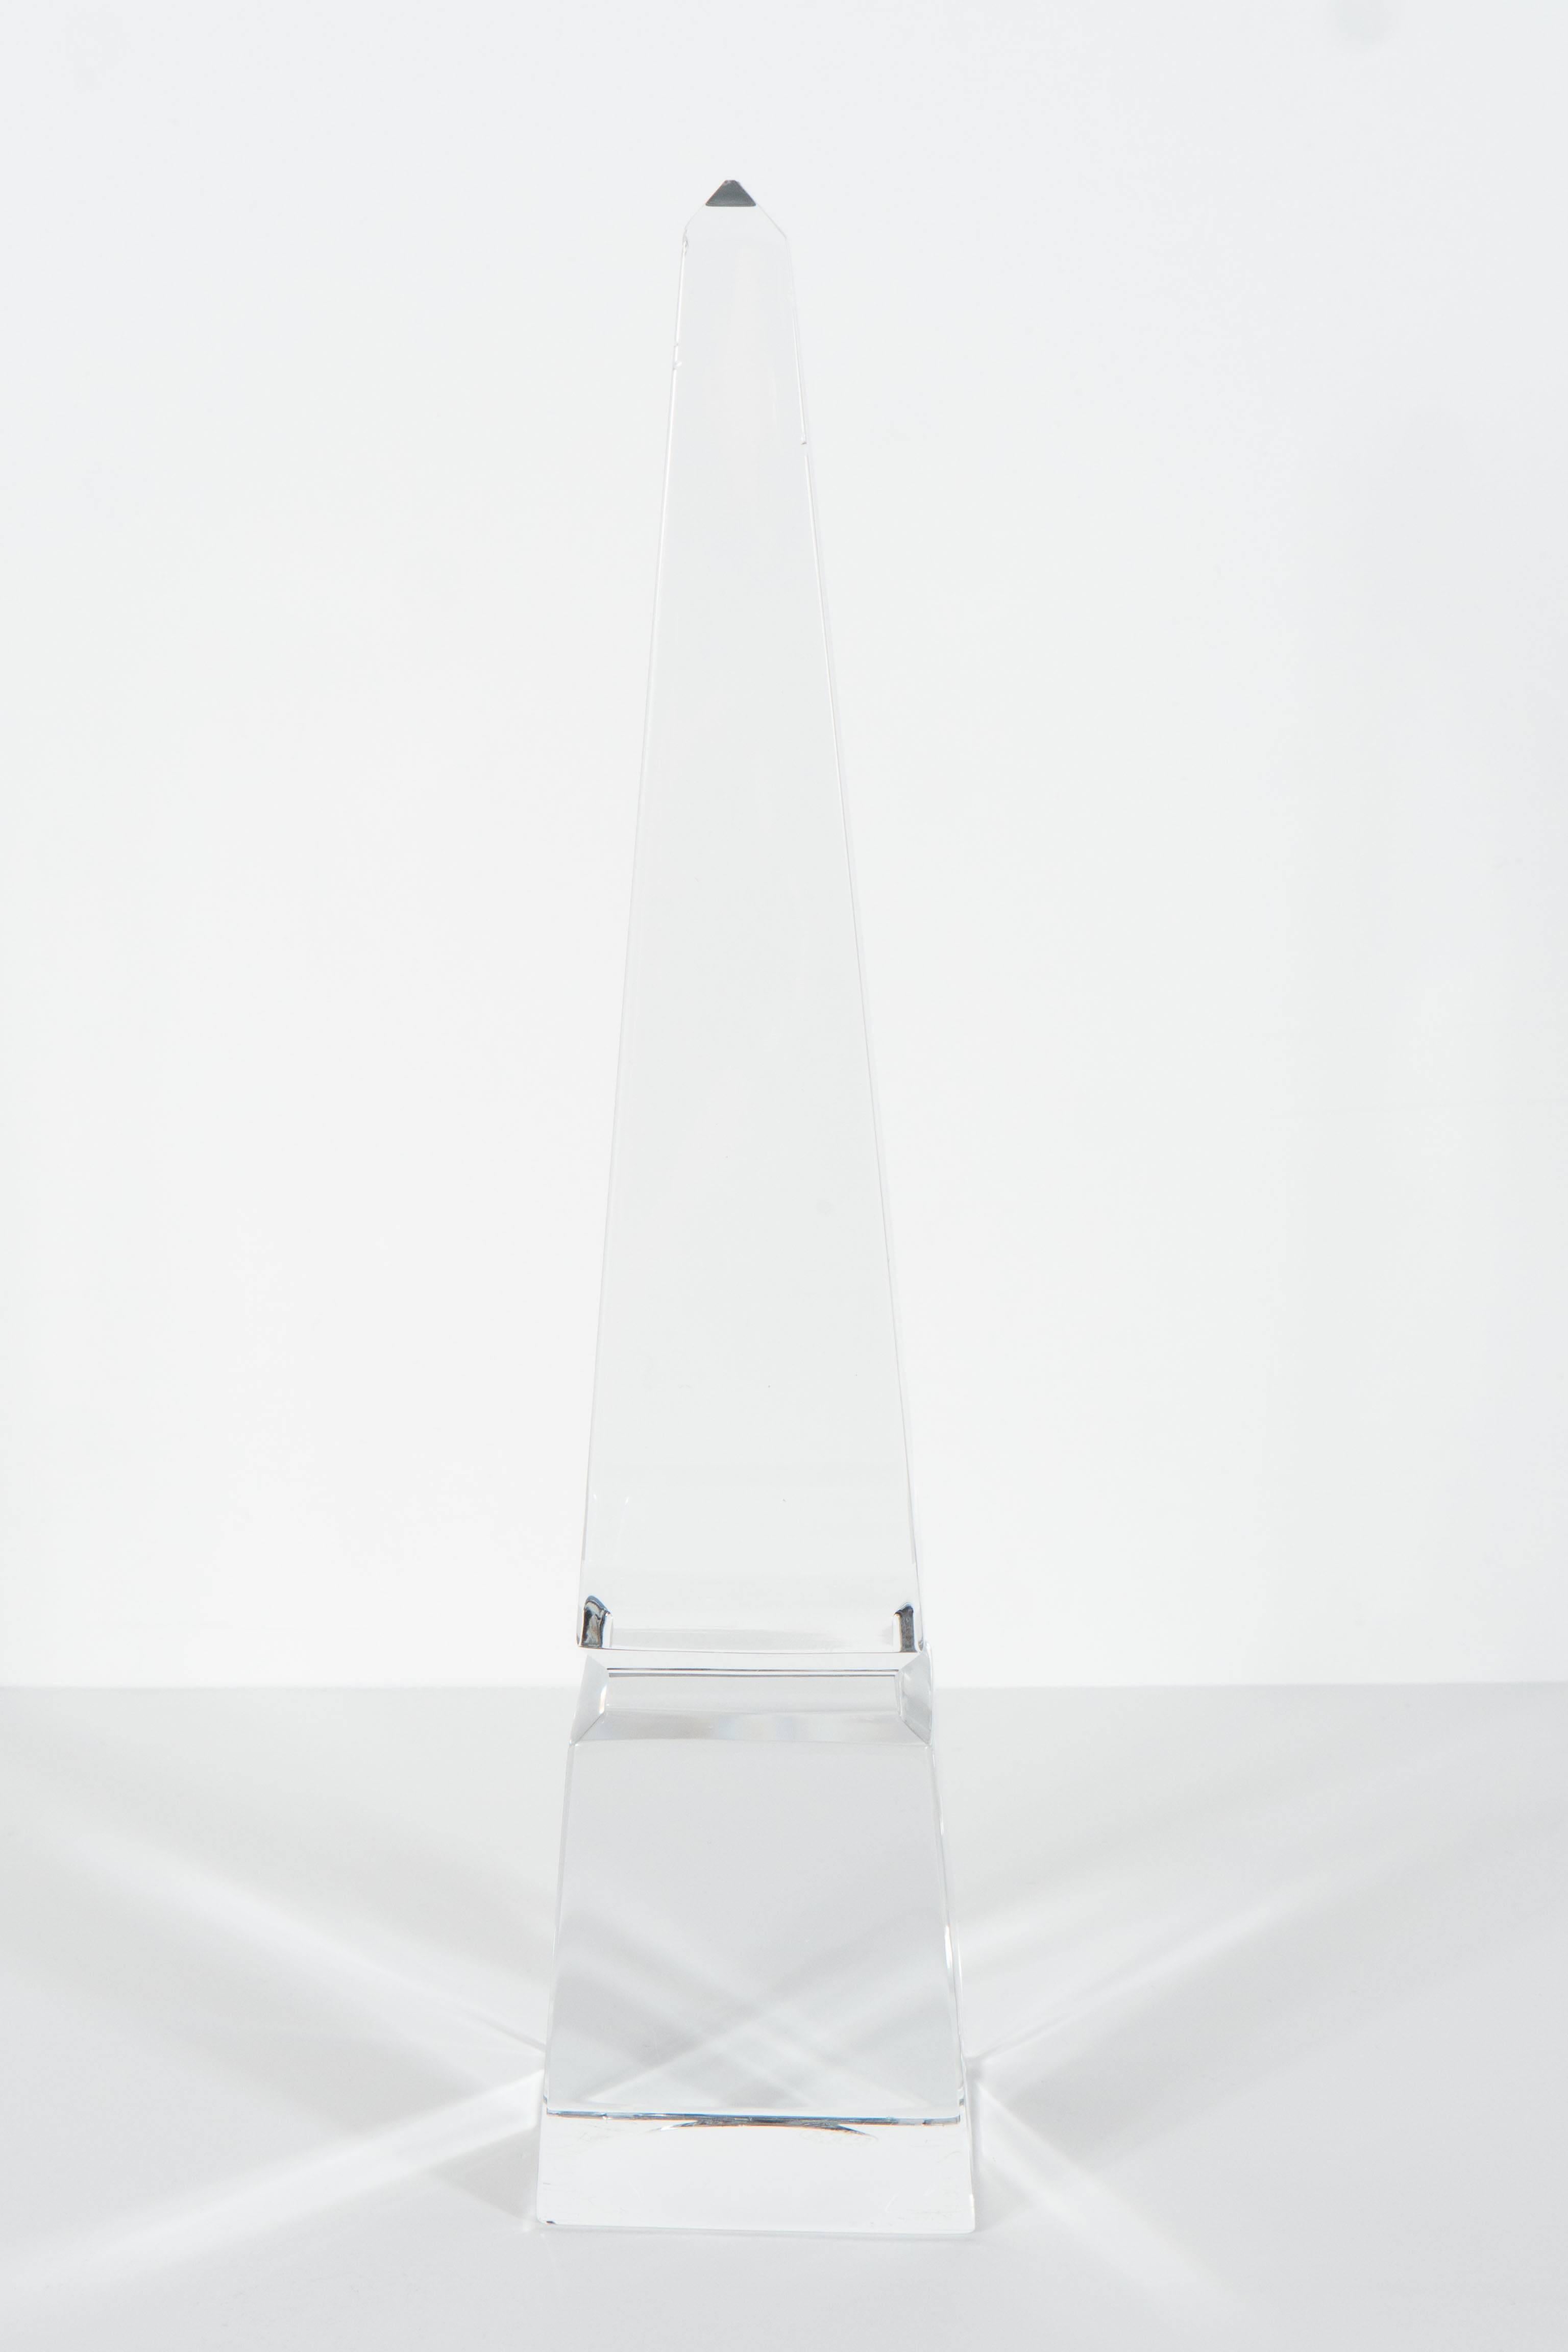 A modernist crystal obelisk by Baccarat with faceted detailing. It bears the Baccarat stamp and seal on the bottom. Excellent condition.